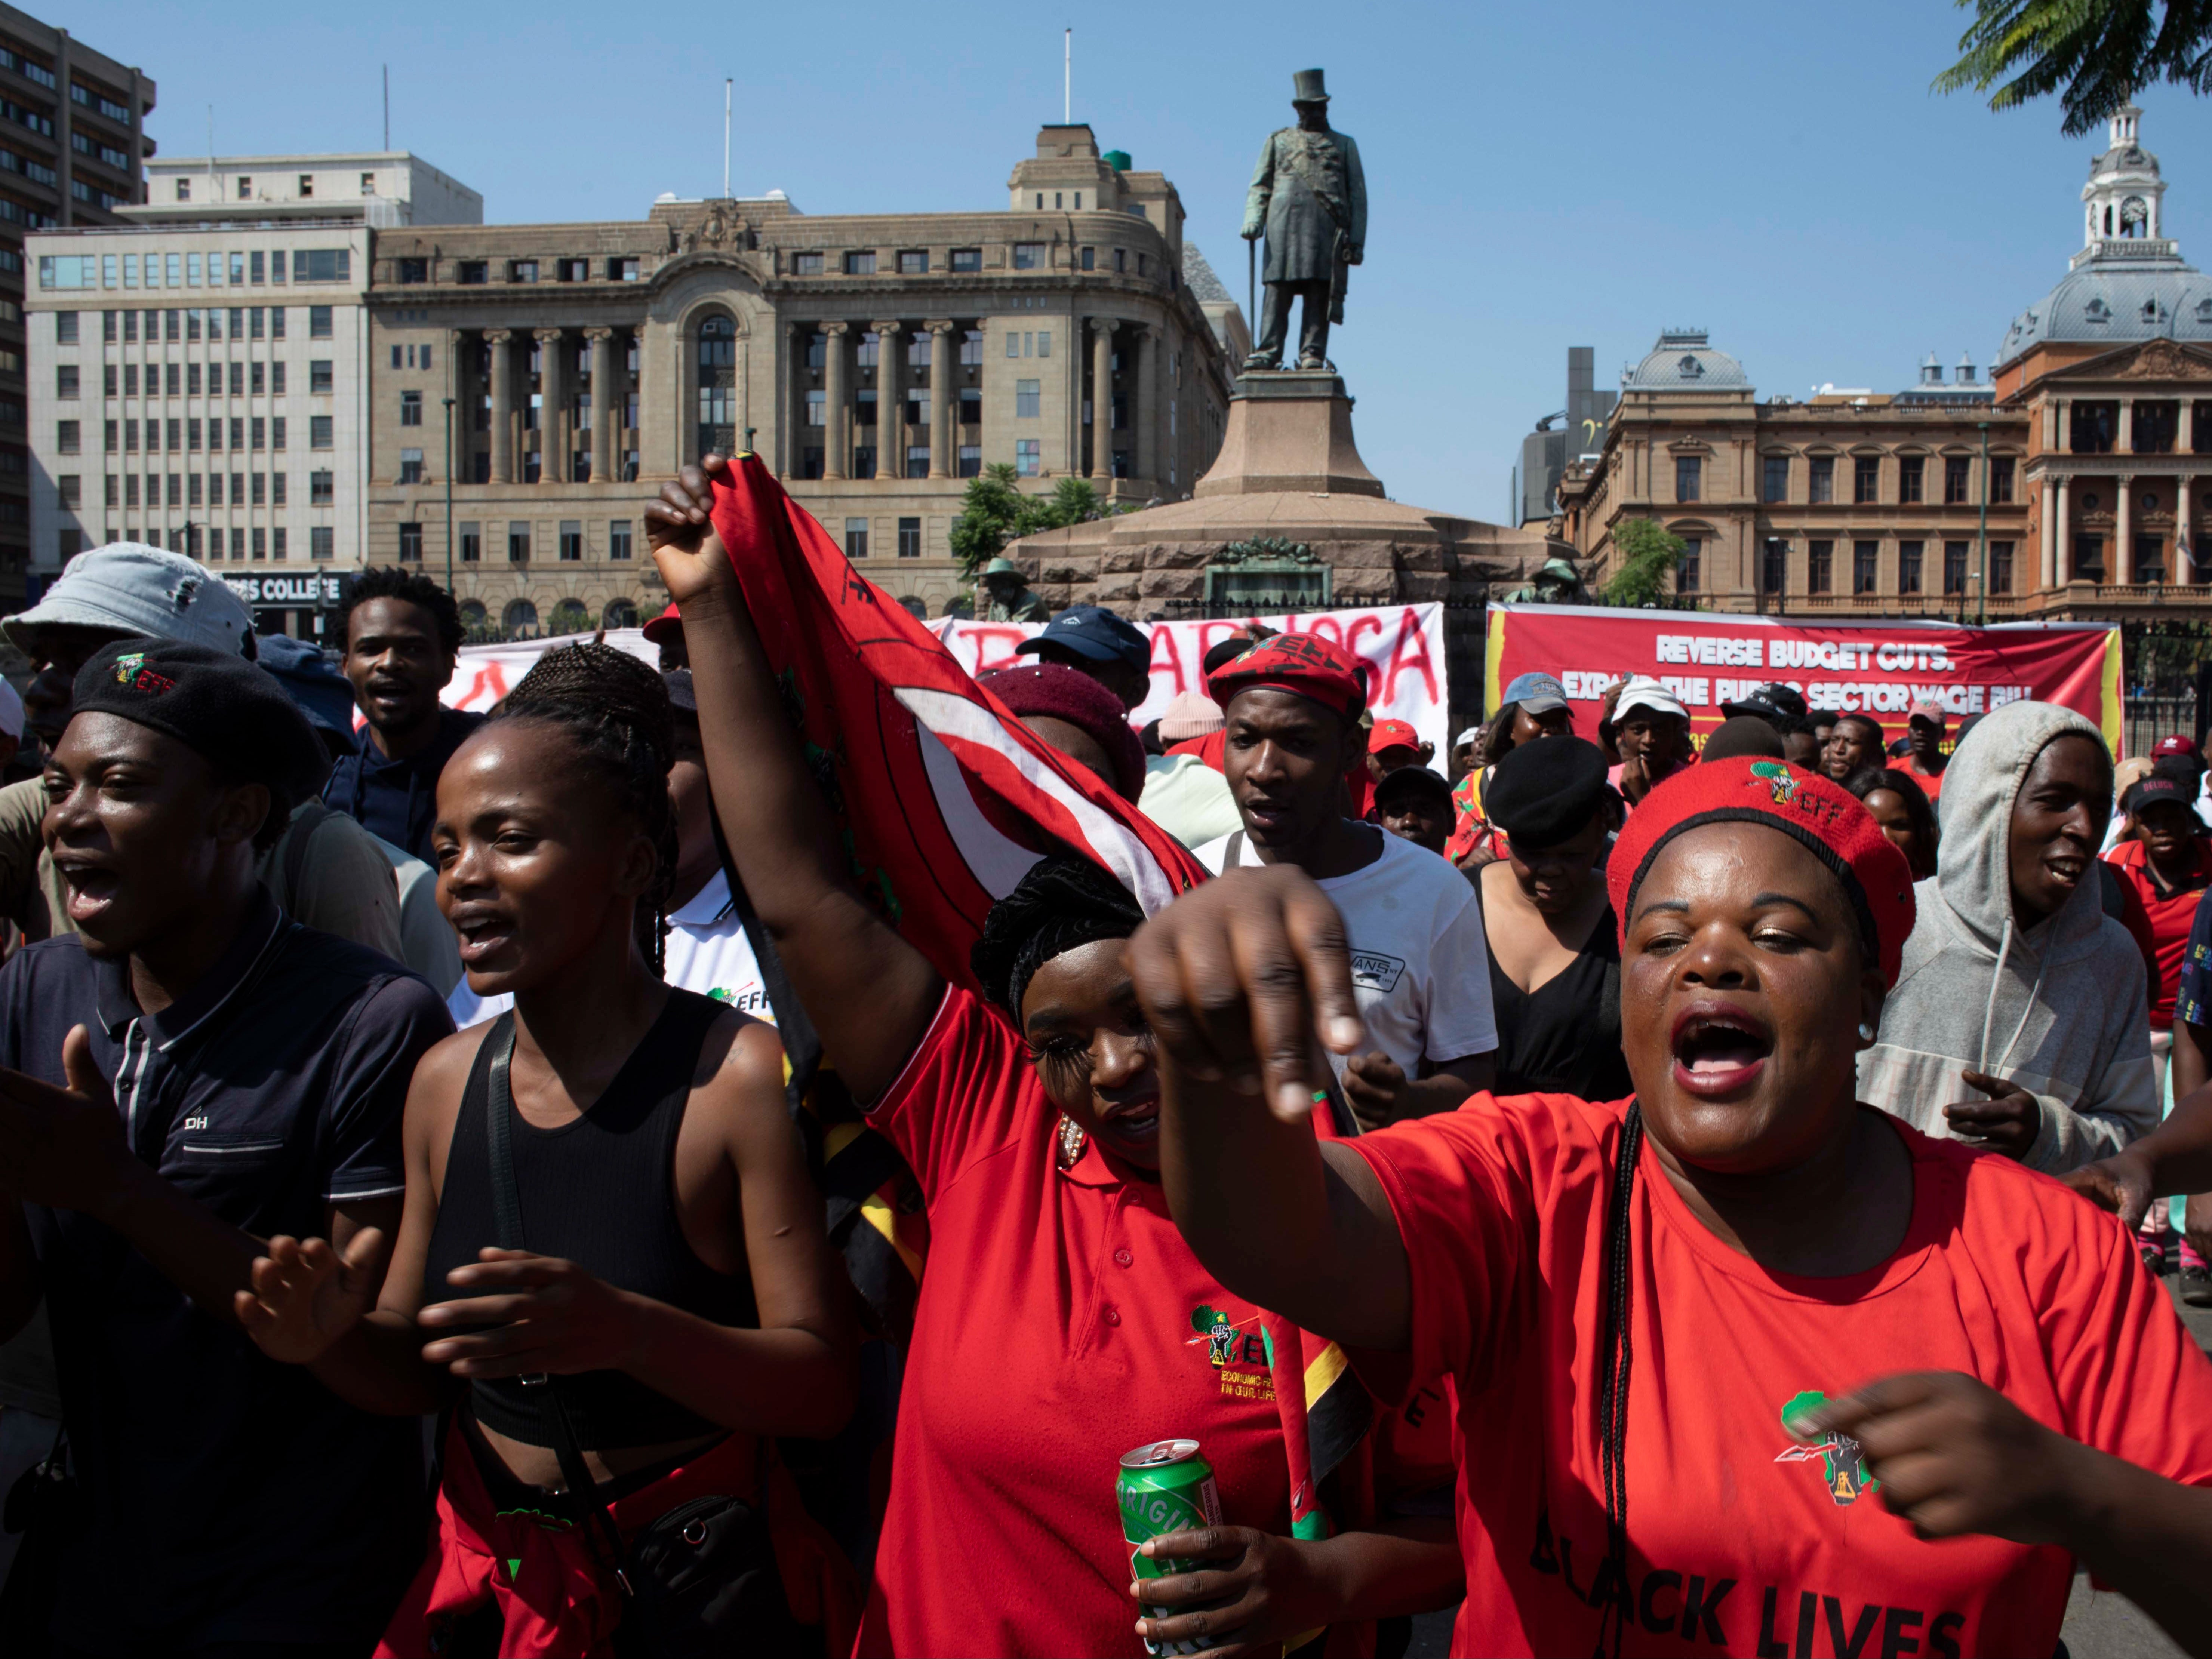 South Africa 'national shutdown': What has sparked the anti